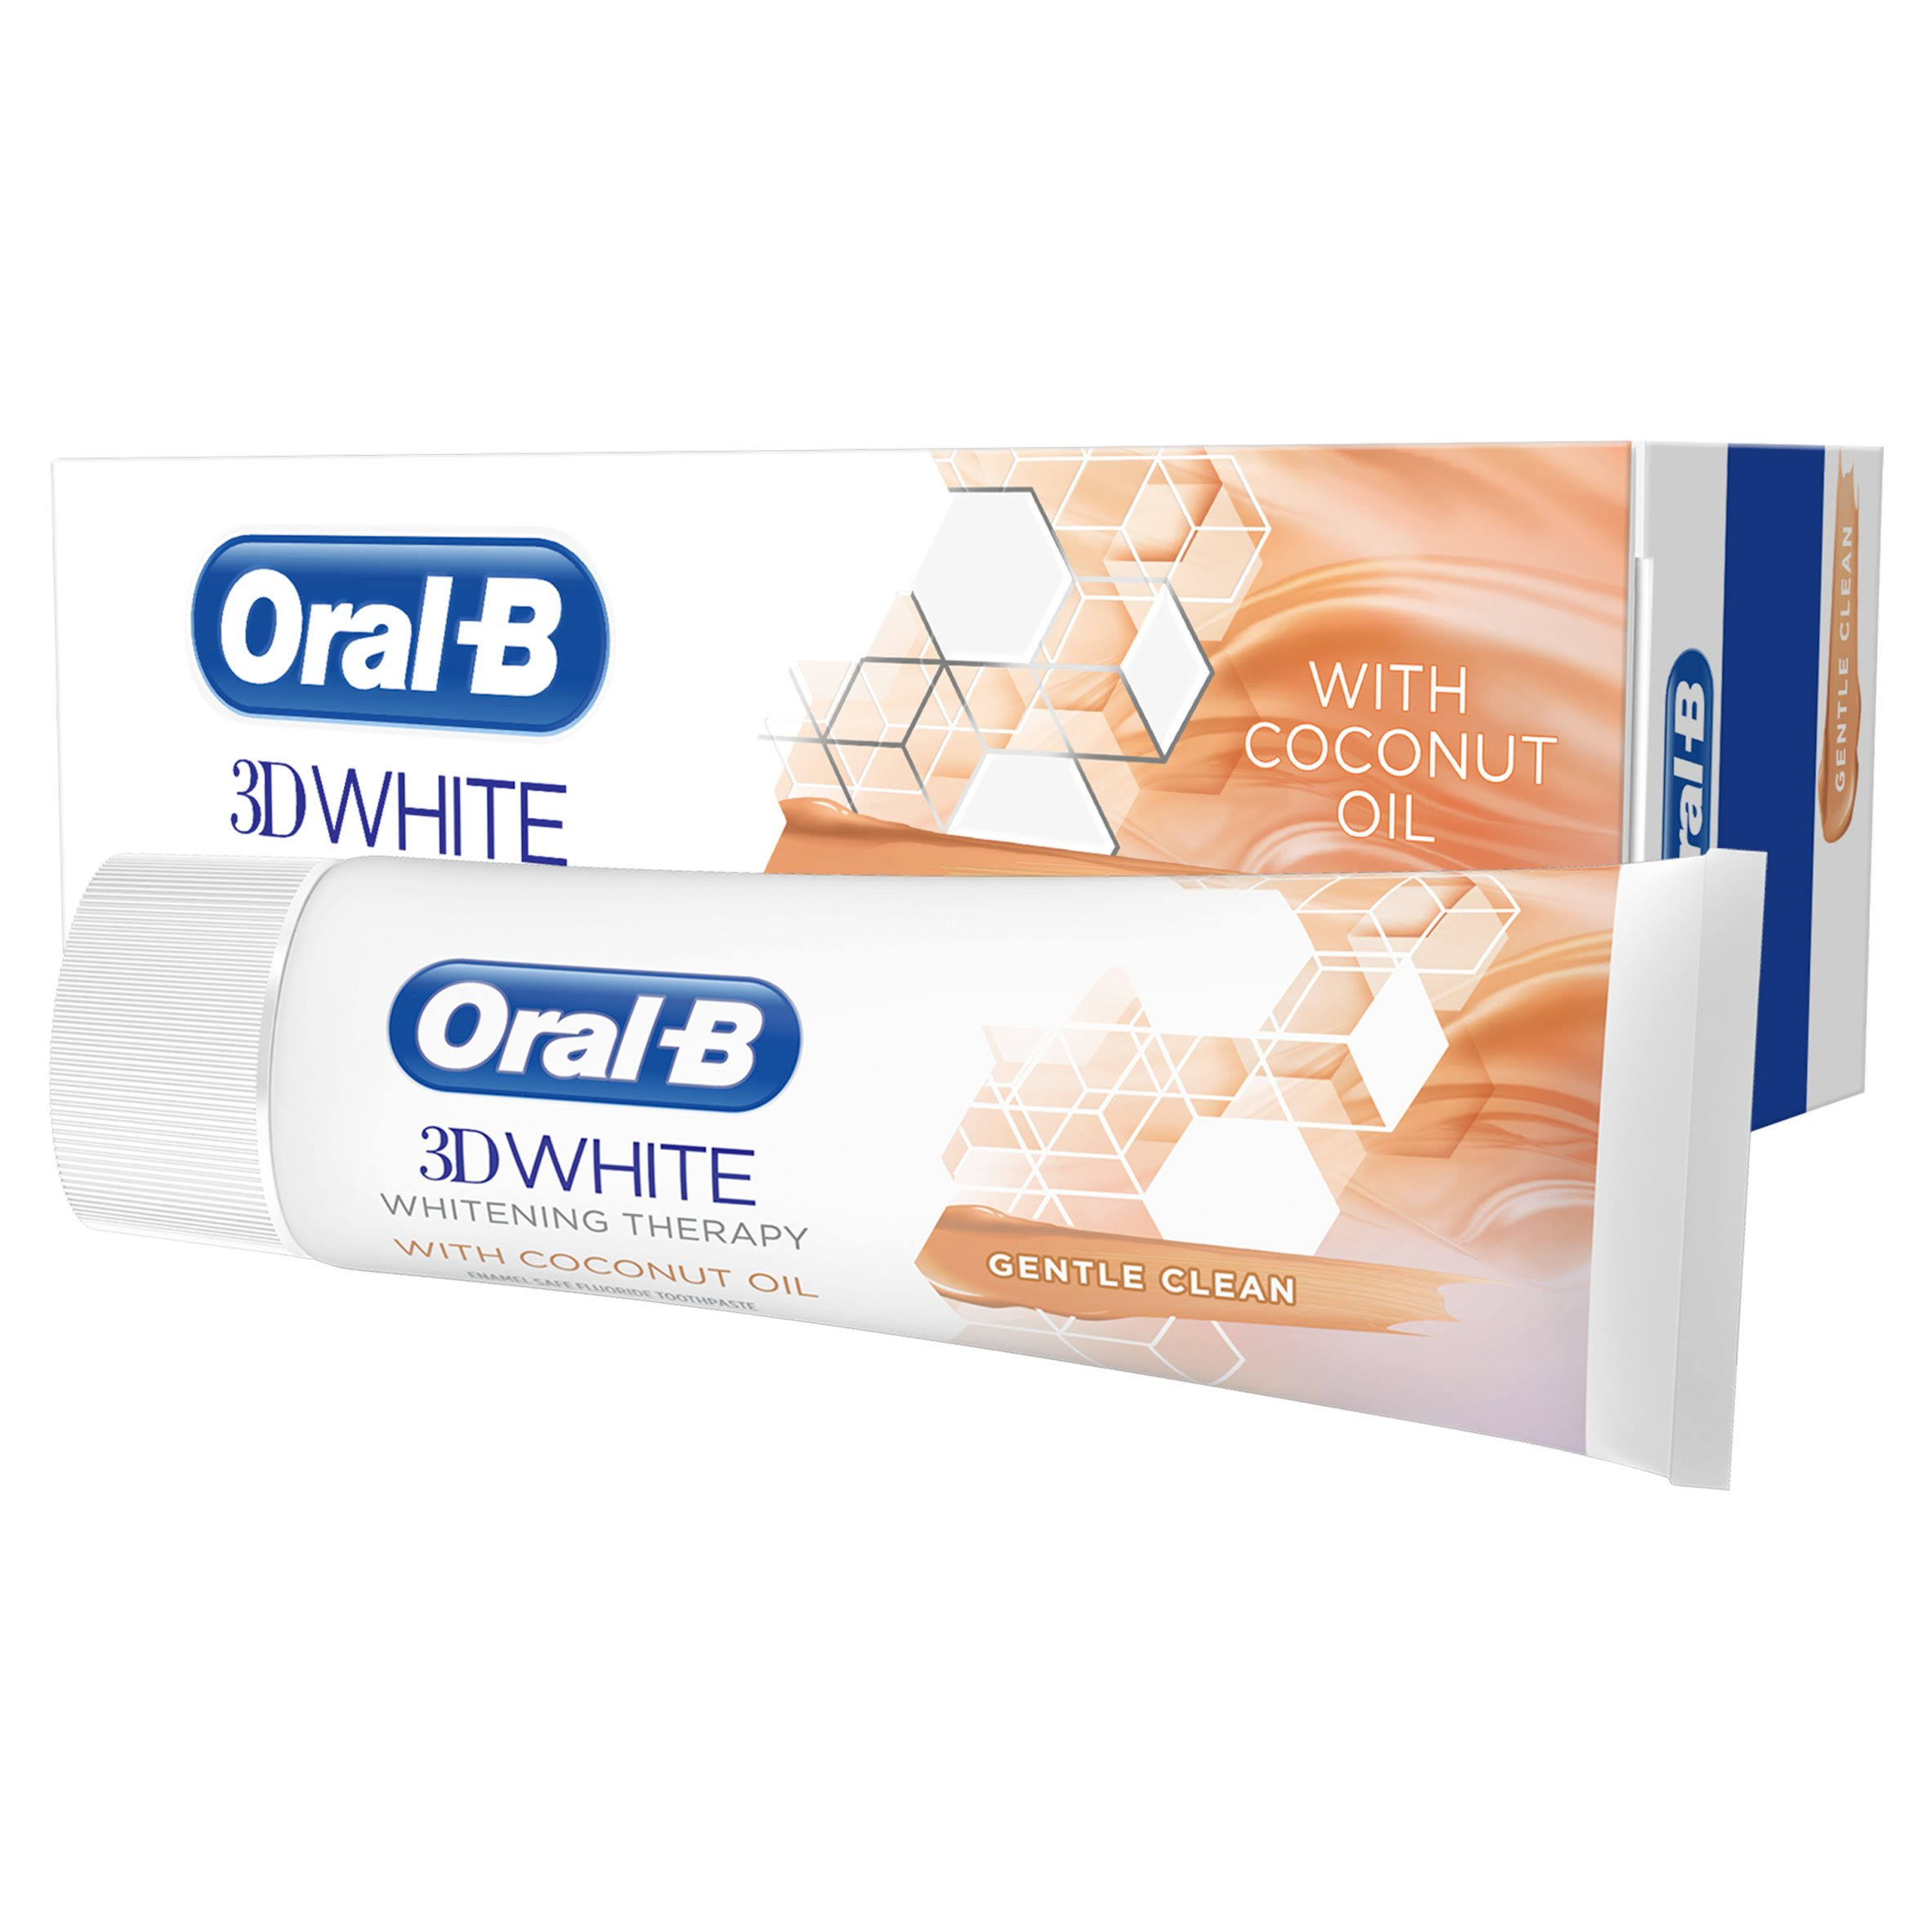 Oral-B 3d White Whitening Therapy Gentle Clean Toothpaste with Coconut Oil 75ml